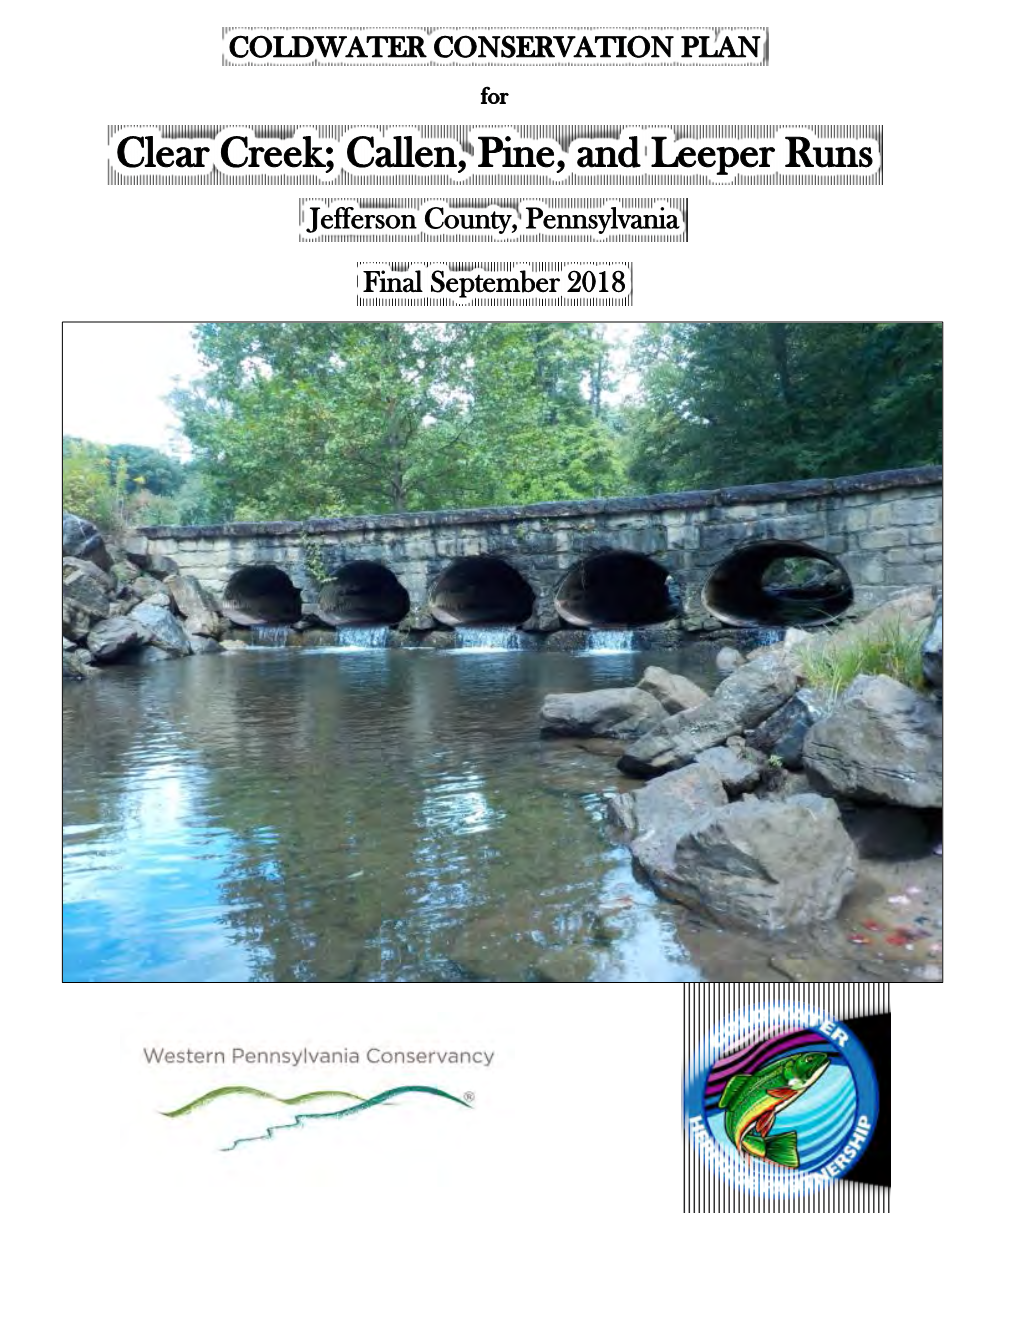 Coldwater Conservation Plan for Clear Creek